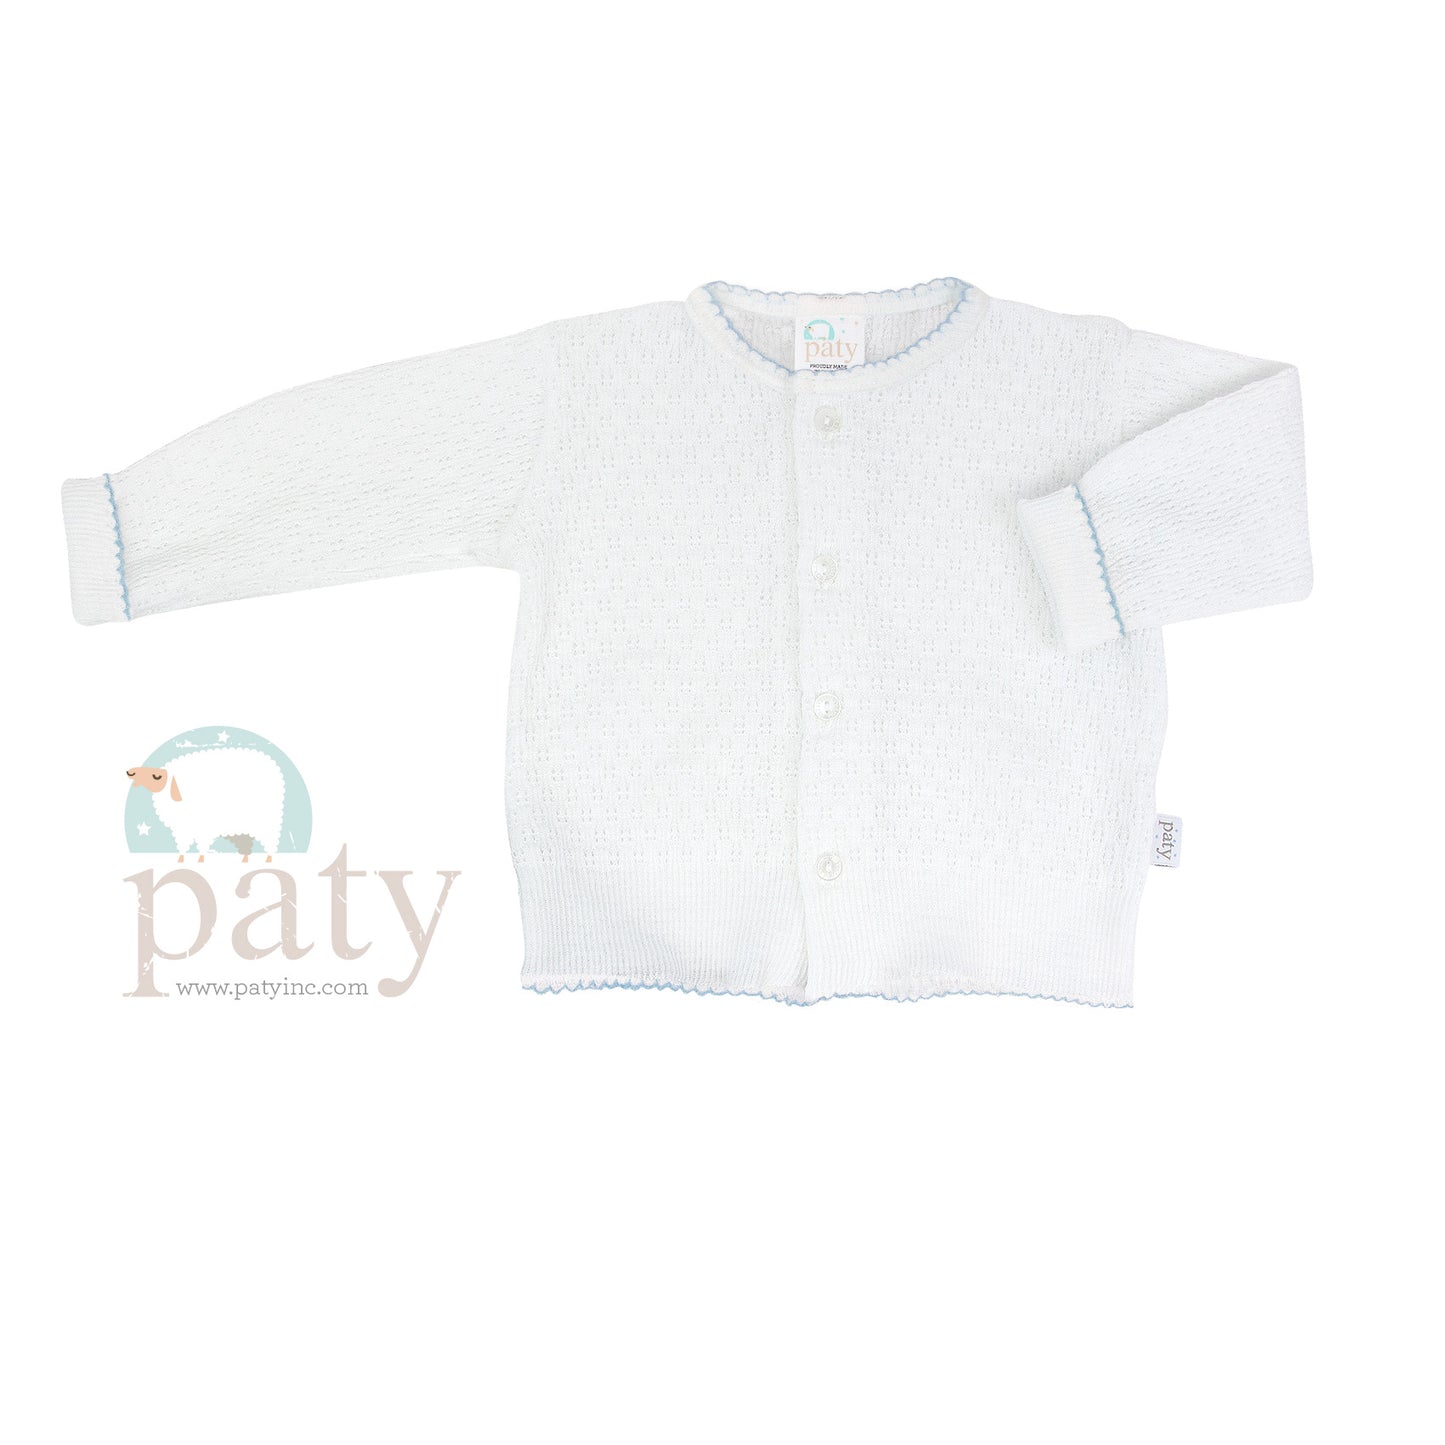 Paty Knit LS Button Up White Cardigan Sweater with Blue Trim